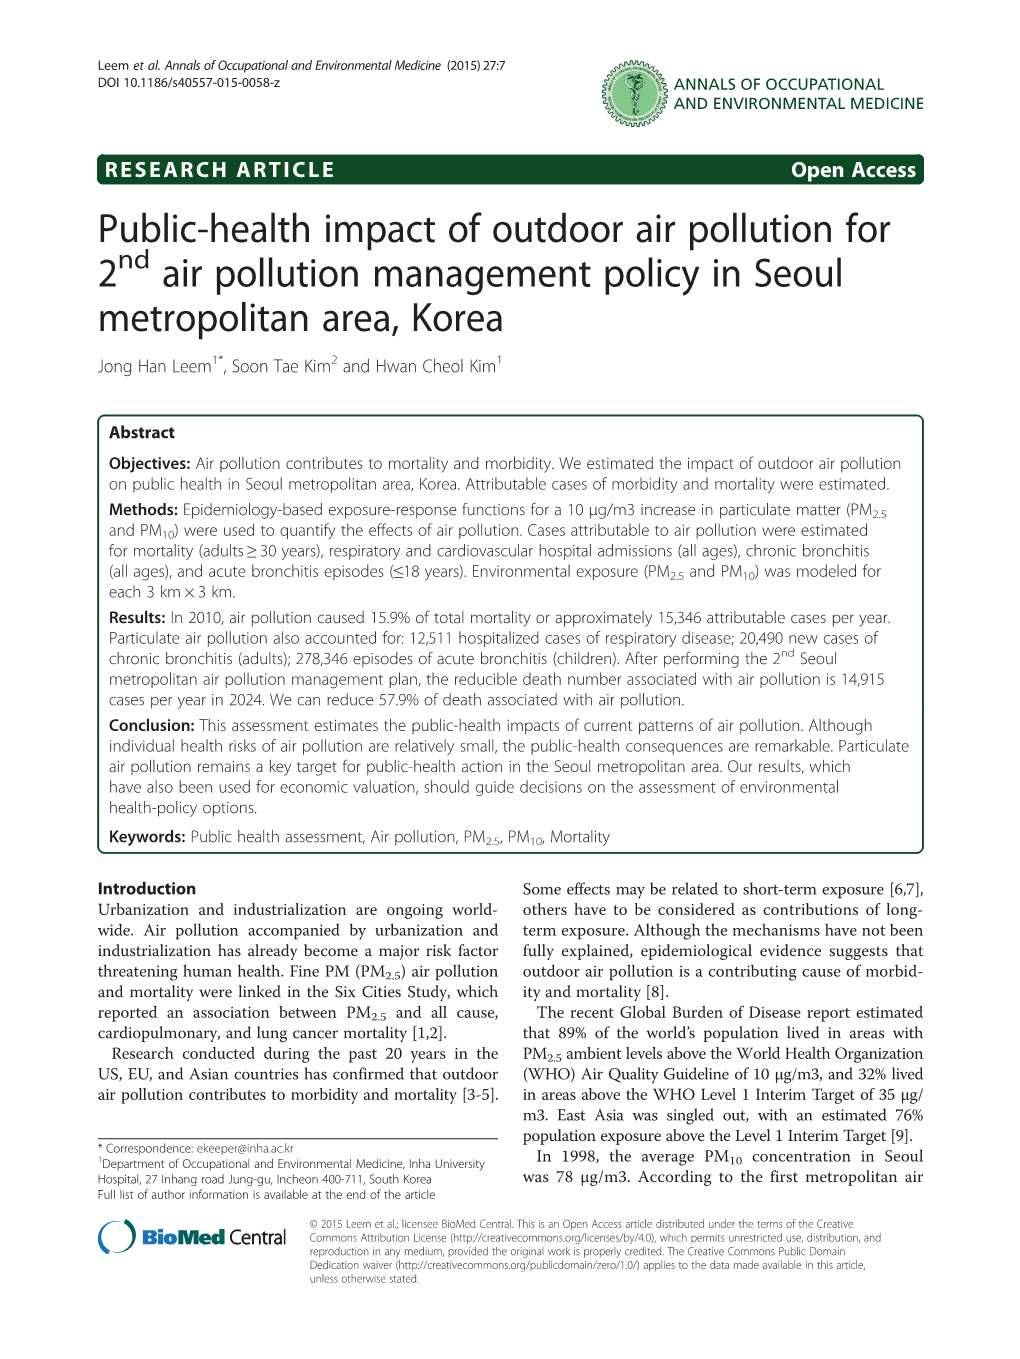 Public-Health Impact of Outdoor Air Pollution for 2